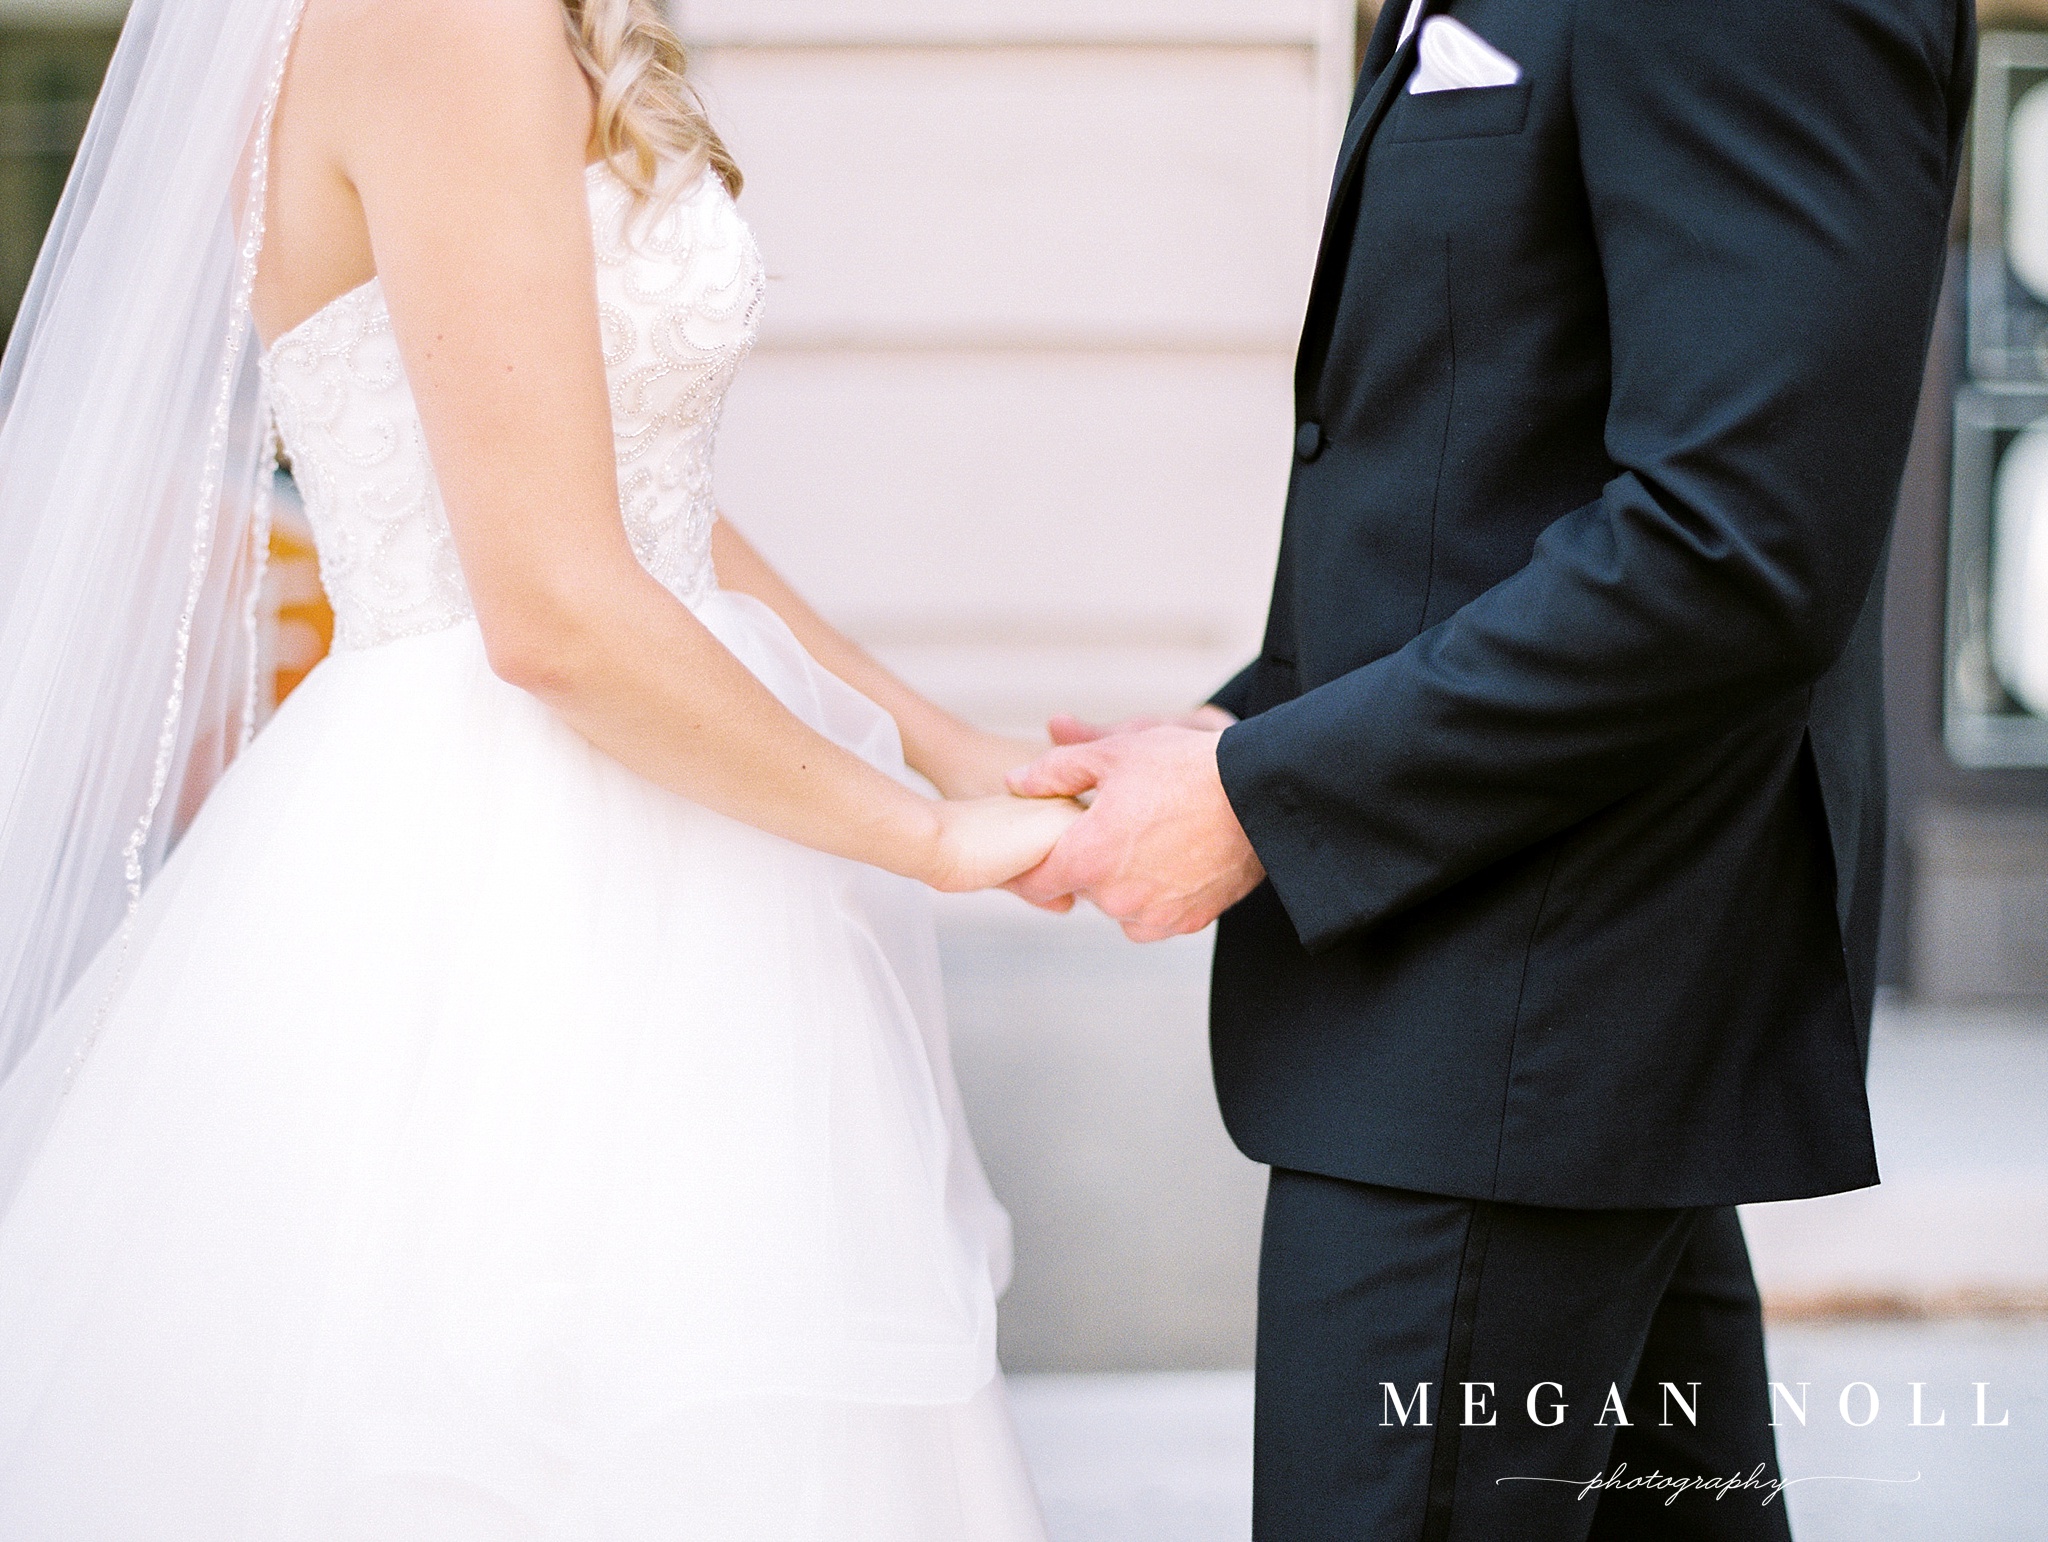 How To Get The Most Images From Your Wedding Day, Wedding Blogger